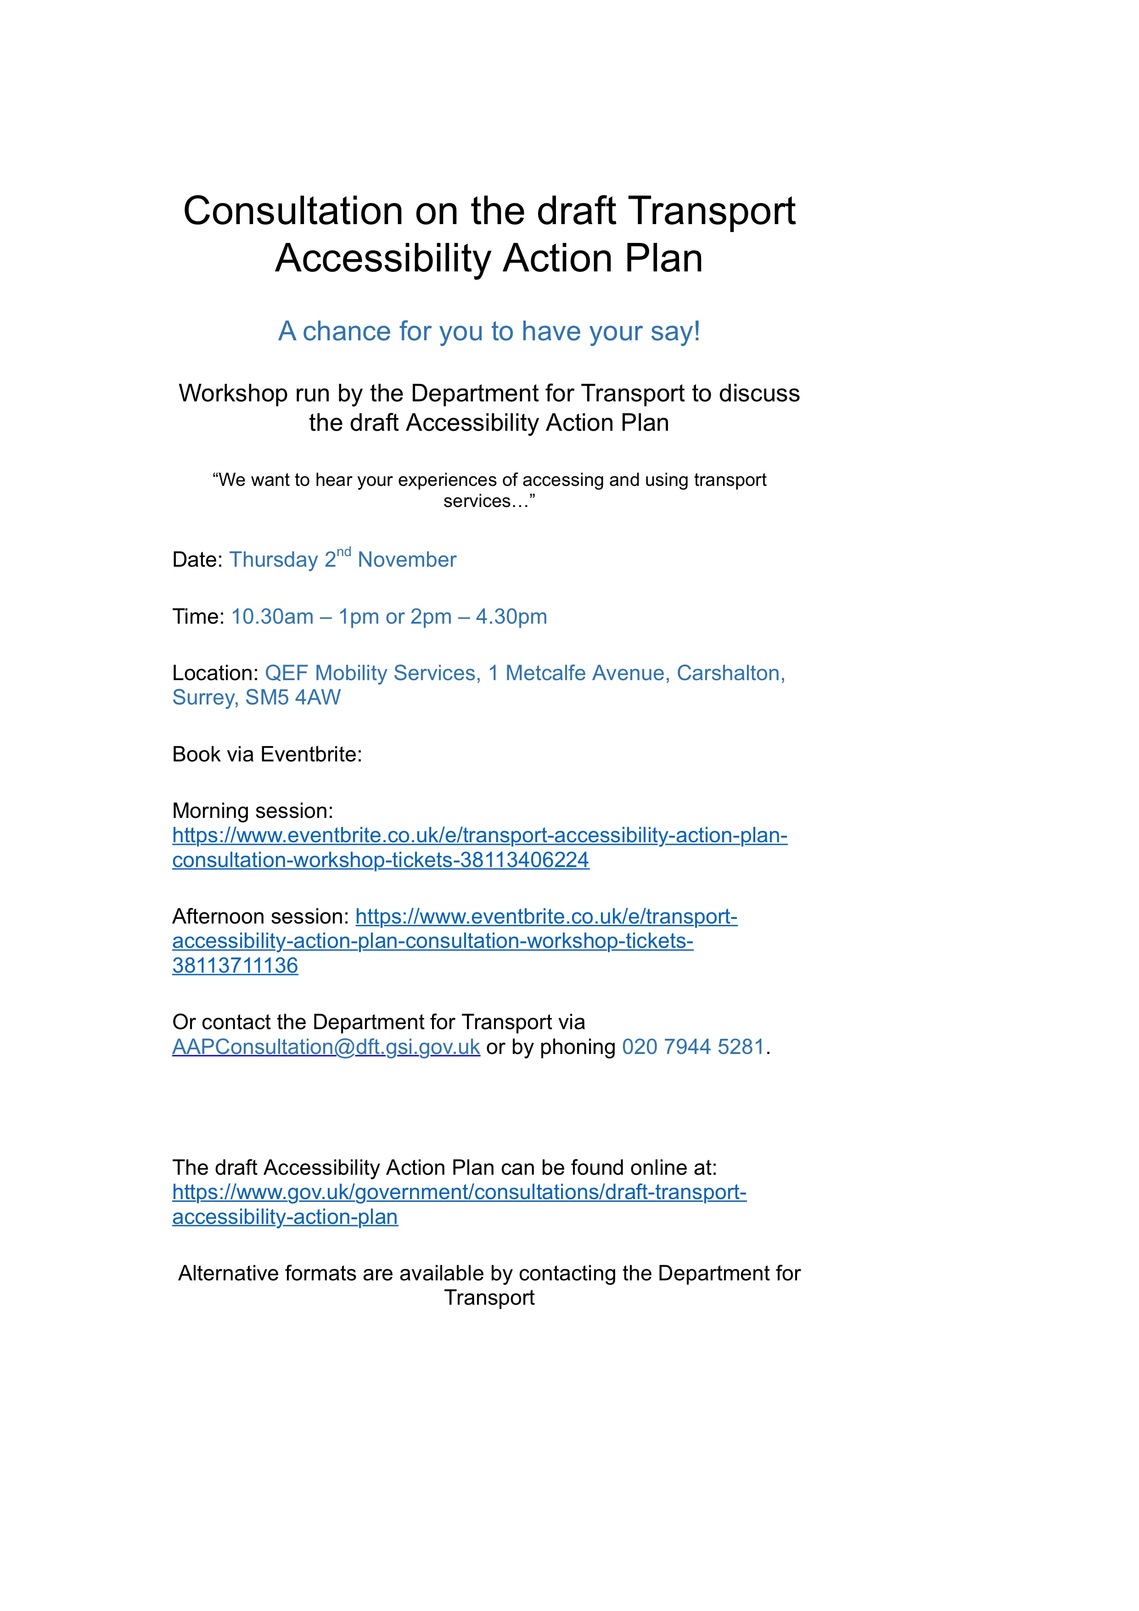 
Consultation on the draft Transport Accessibility Action Plan Flyer